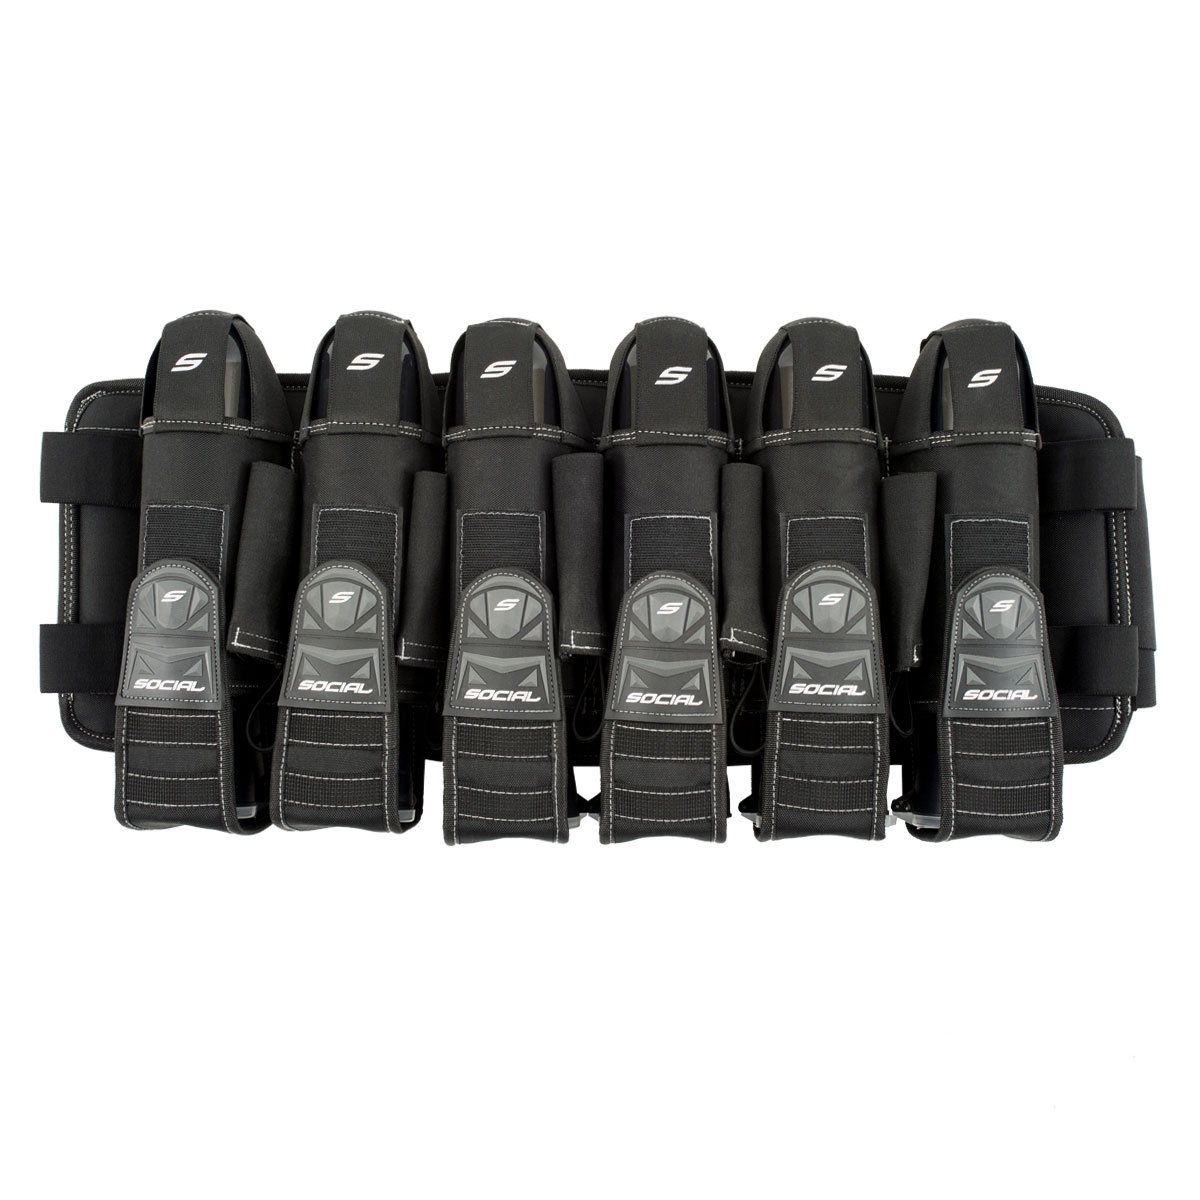 Black 5 Pod Paintball Pod Pack Harness Holds up to 5 Pods Tubes 